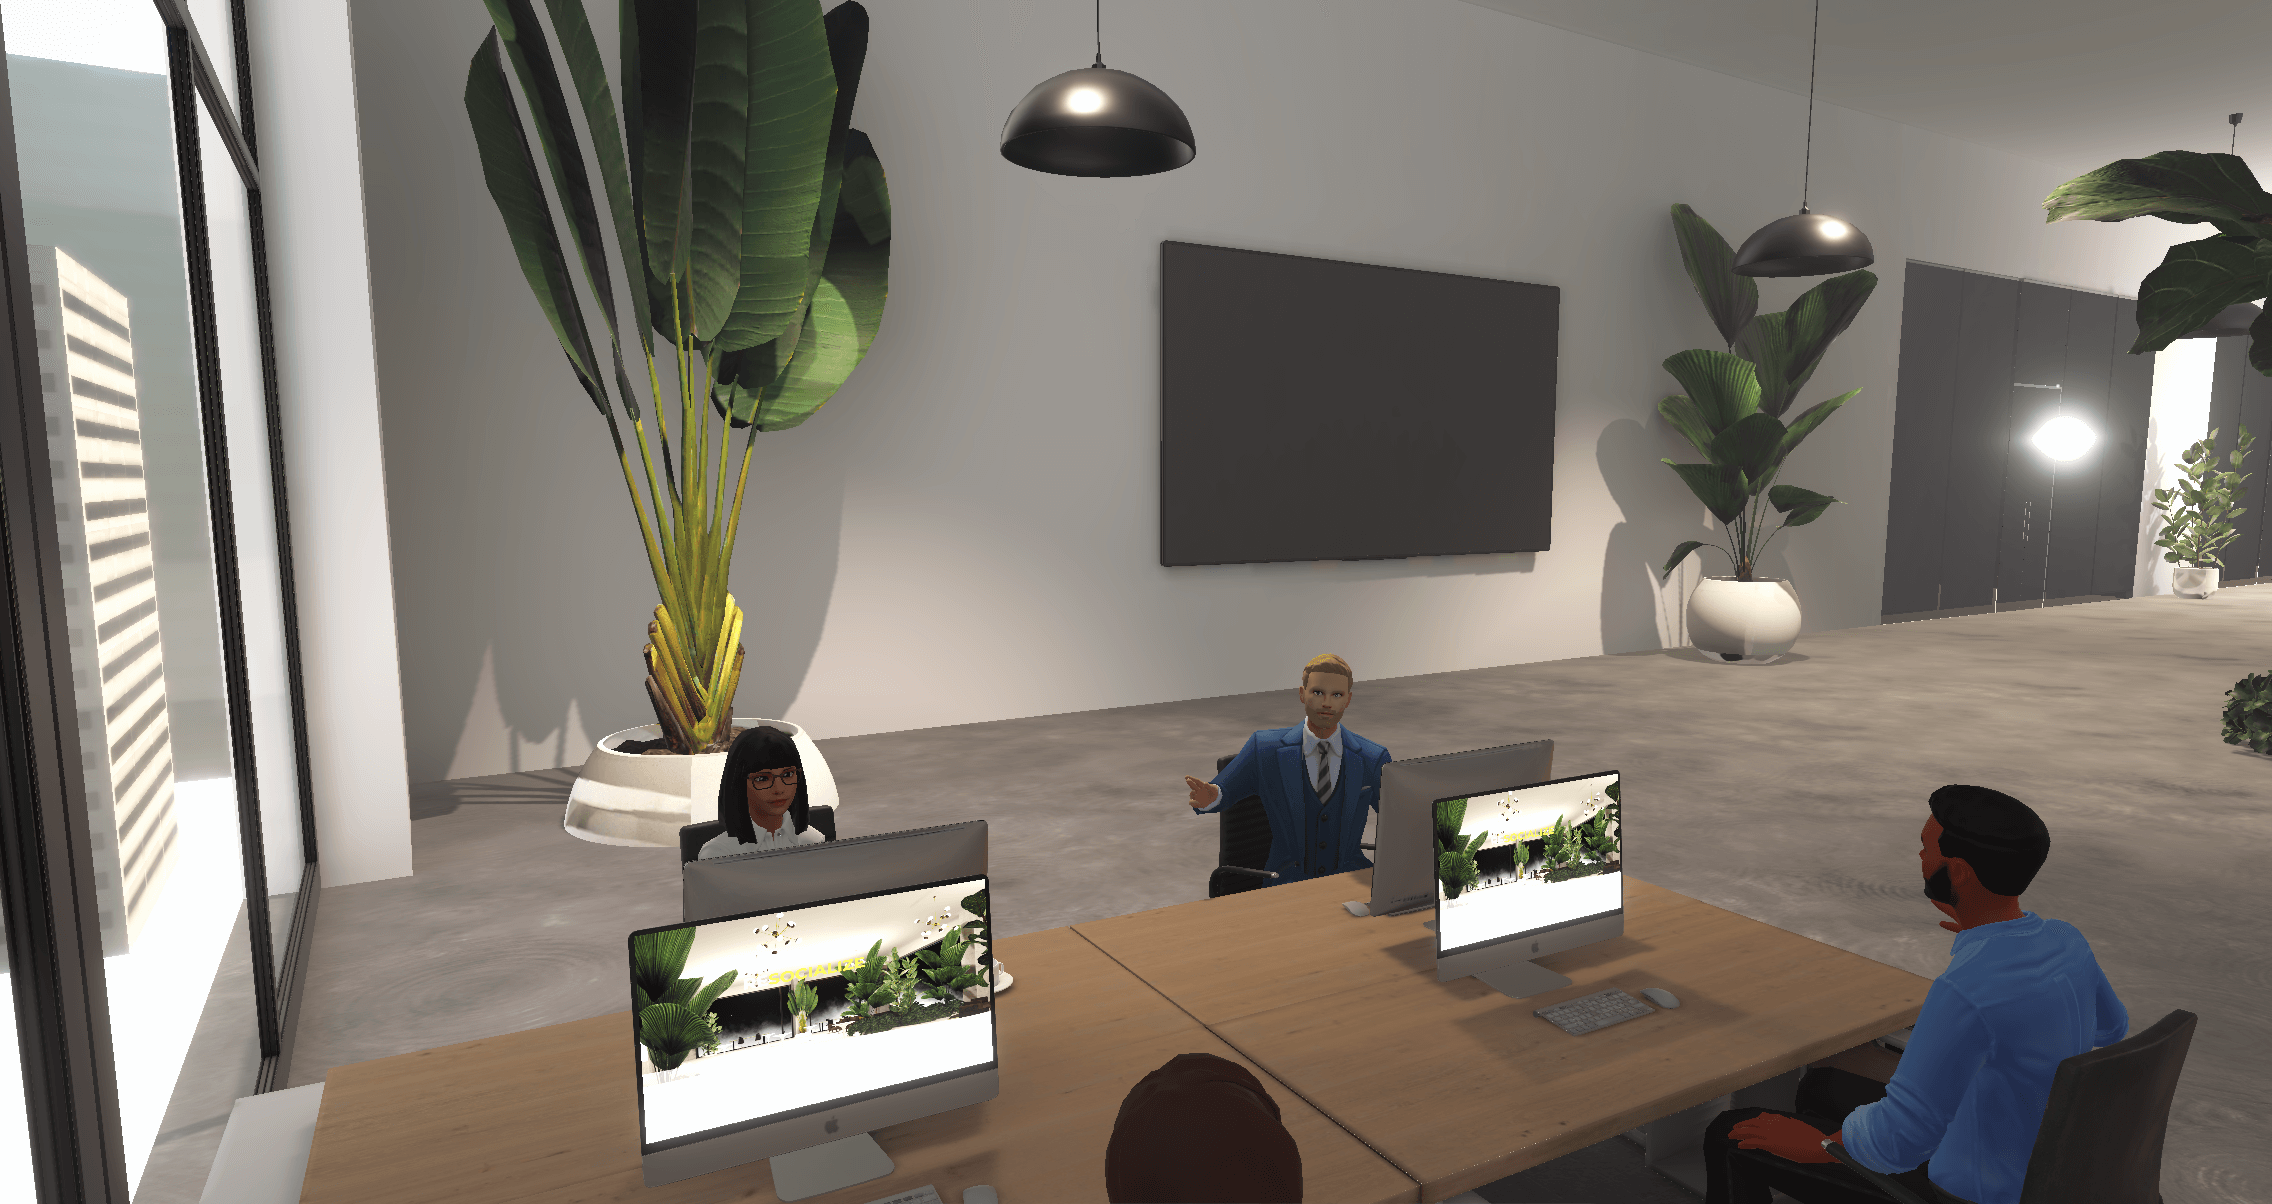 ReSocialize virtual office online metaverse meeting space with 4 avatars sitting around desks working remotely. Plans and pricing, this image highlights the ReSocialize office offering.